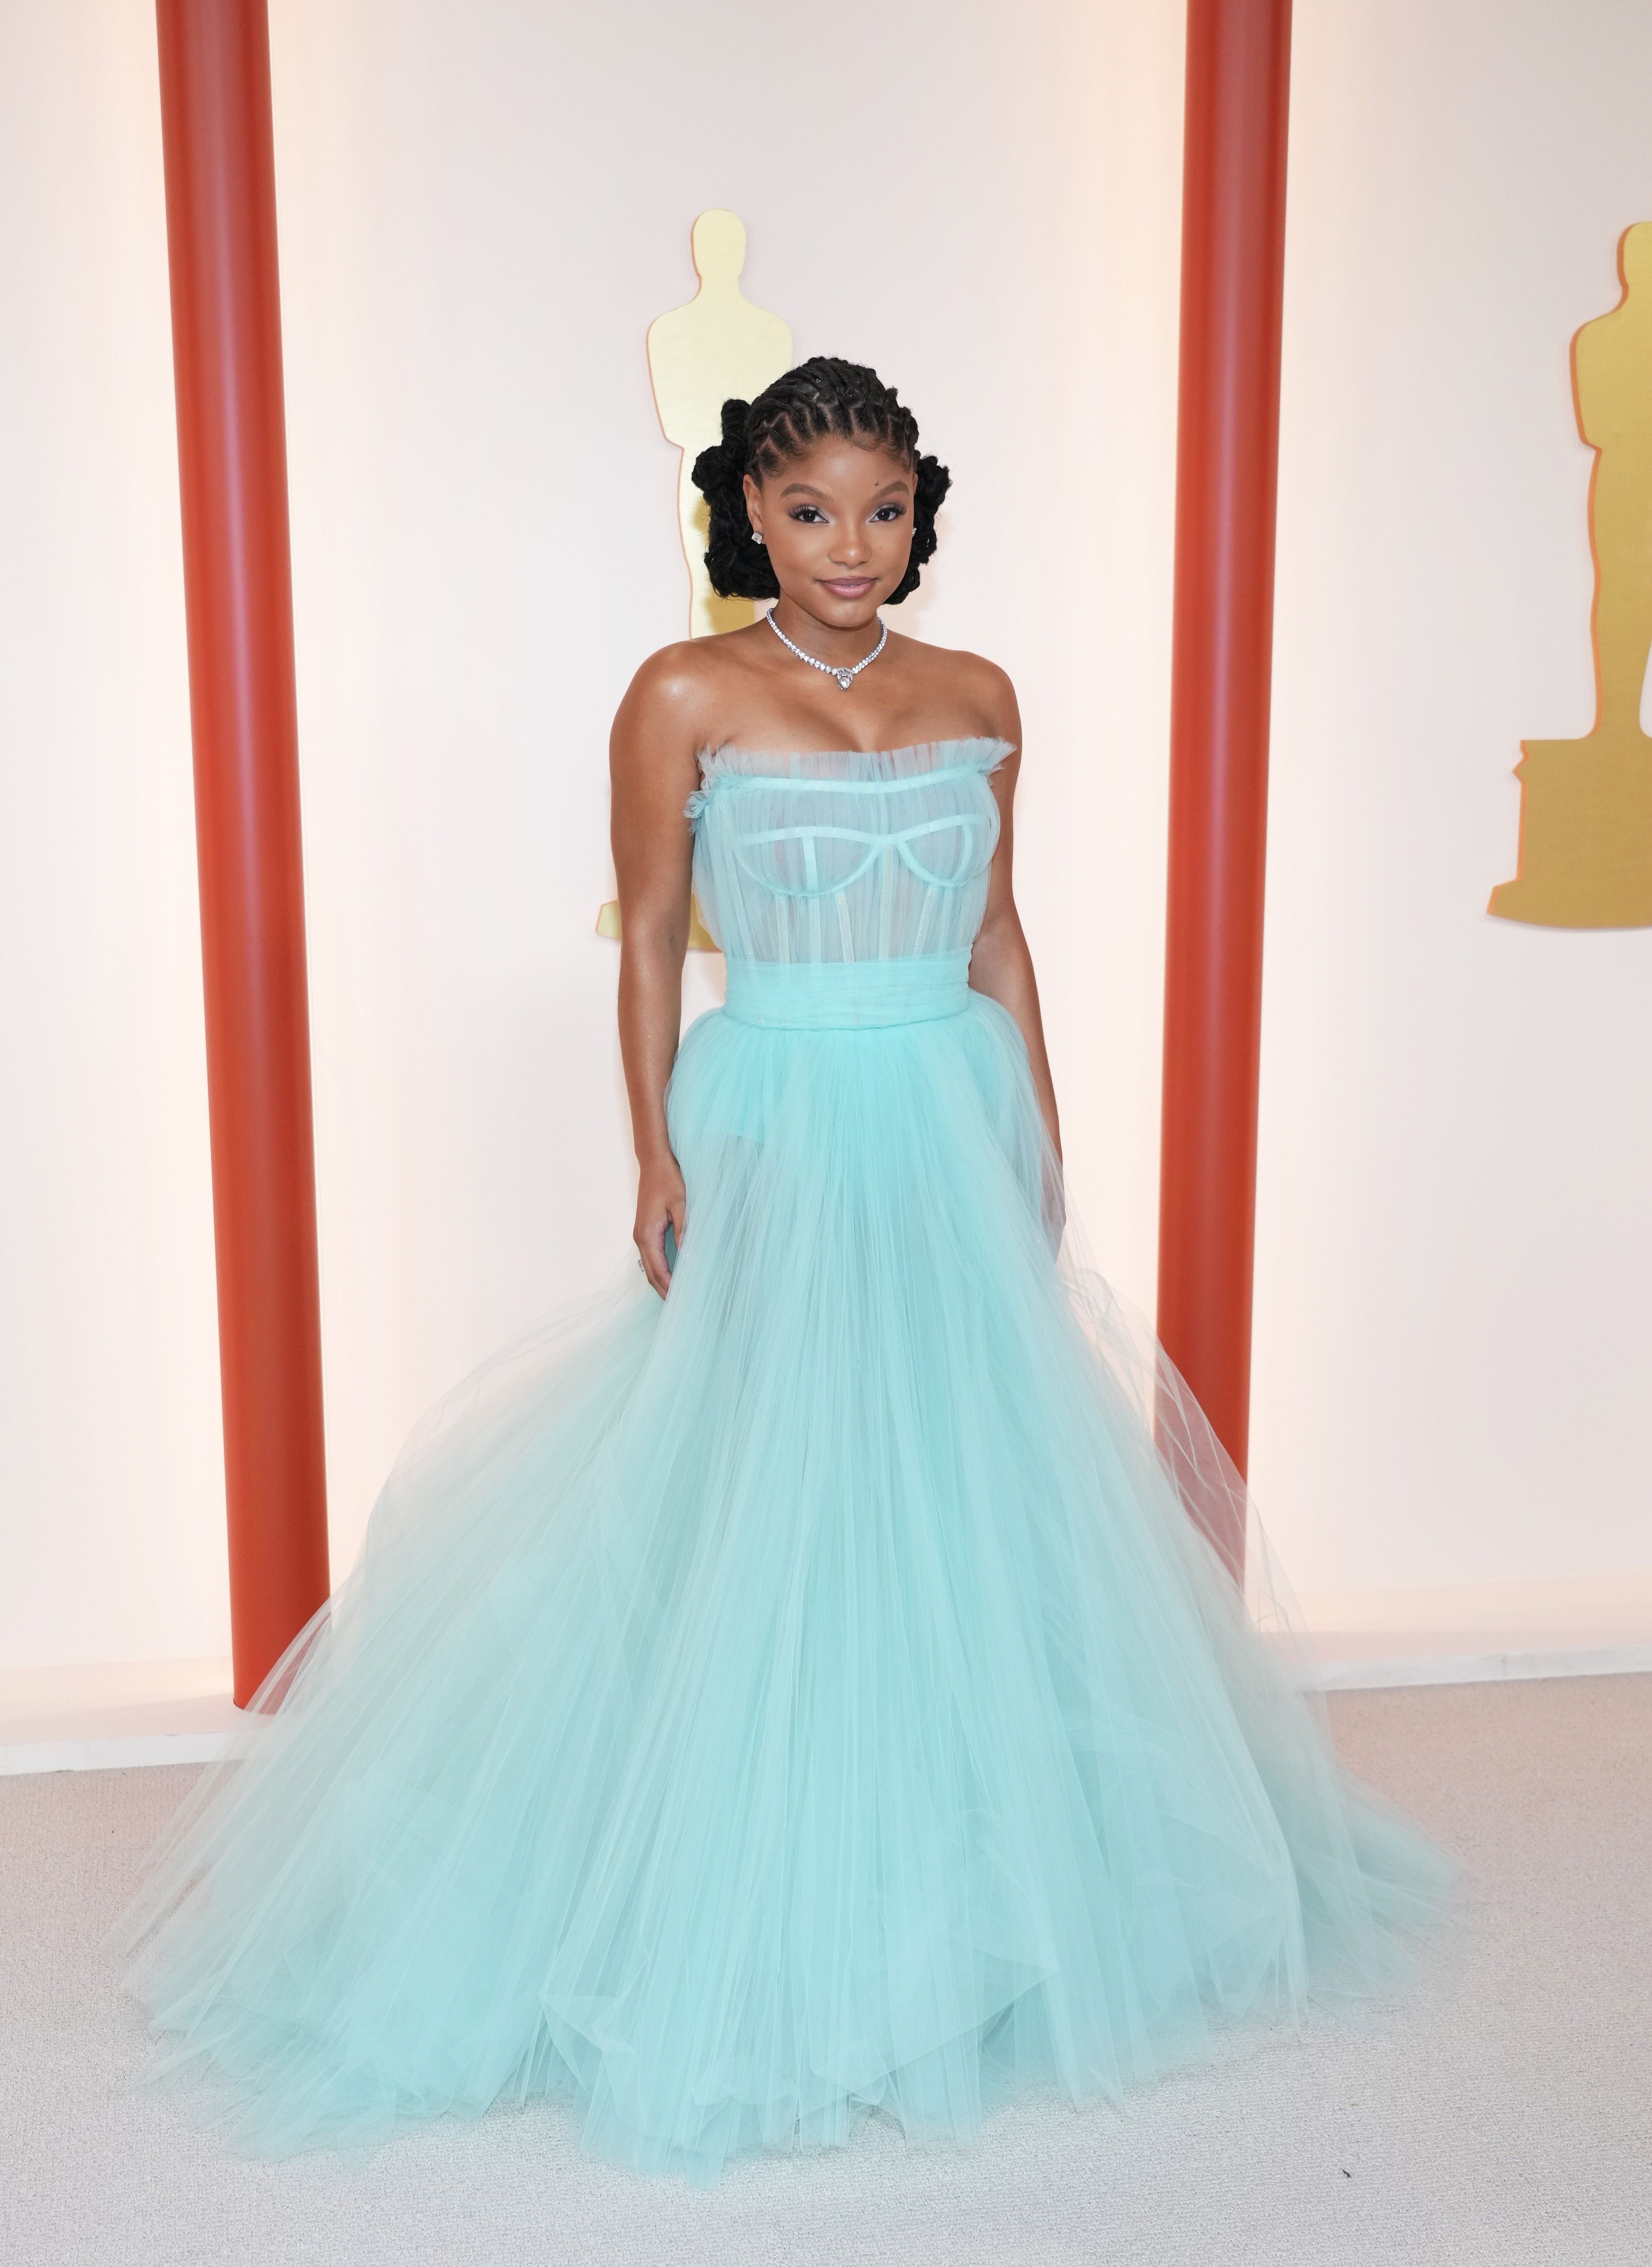 Oscars red carpet: Best dressed at 2023 Academy Awards - Los Angeles Times